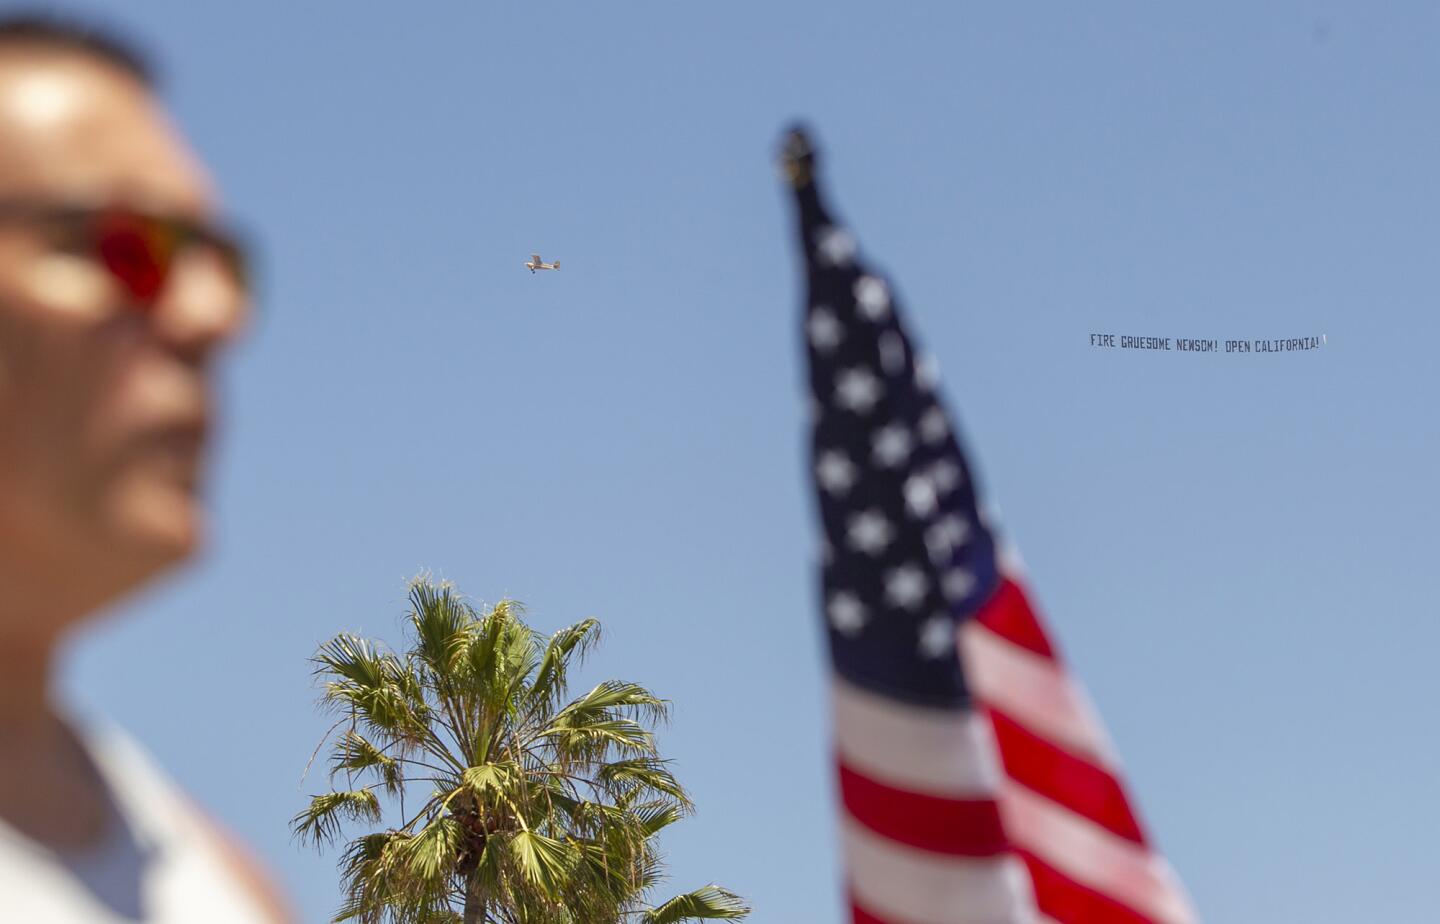 A plane carrying a political message for Gov. Gavin Newsom circles a crowd of protesters in Huntington Beach on Friday.